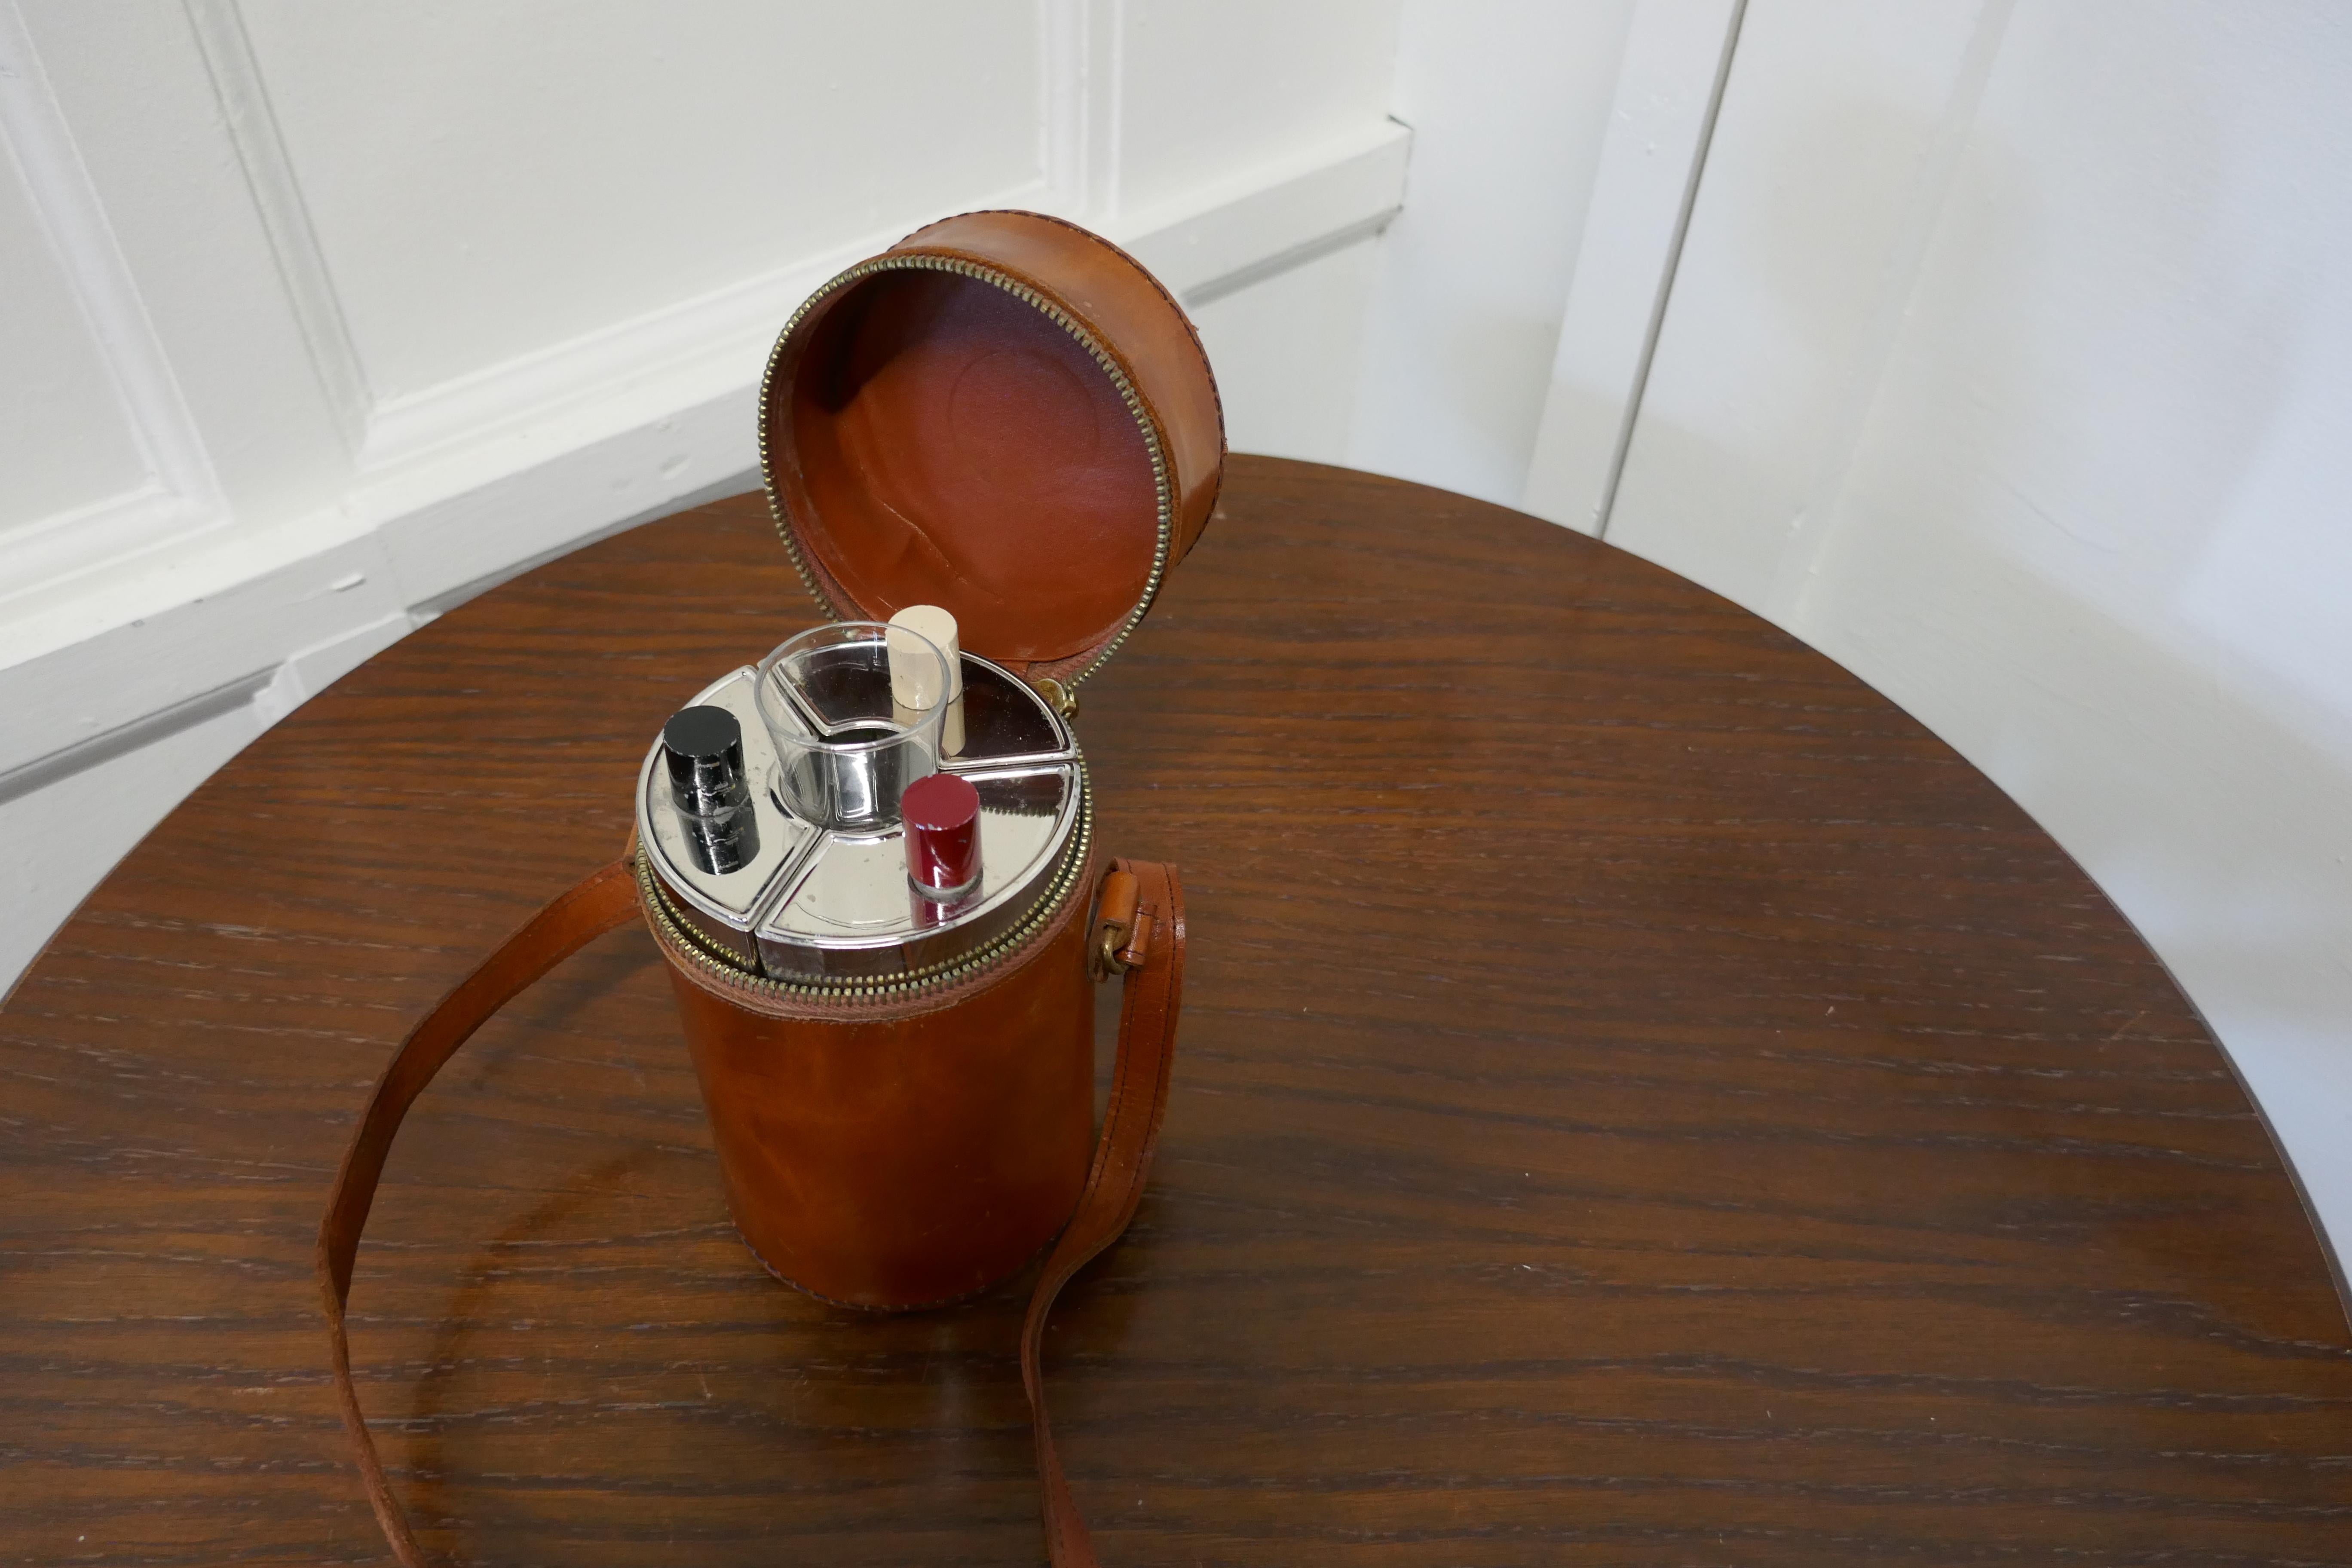 1920s German huntsman’s drinking flask set

A very unusual piece, the set of 3 shaped chrome flasks sit in a circle in their leather hide zip up box with the shot glass which sits in the centre
The flasks have 3 different colored lids no doubt to